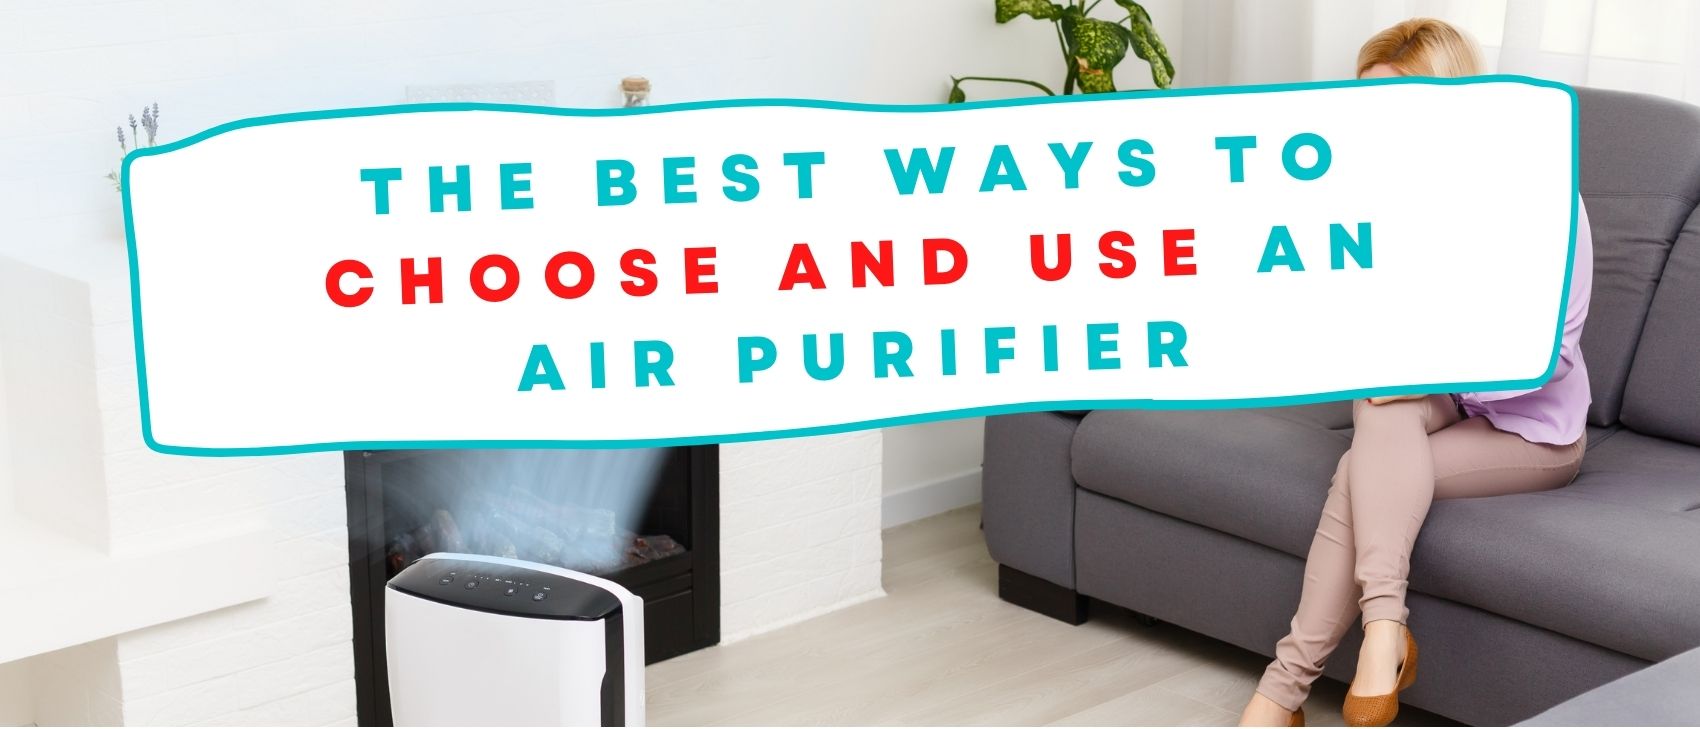 The Best Ways to Choose and Use an Air Purifier